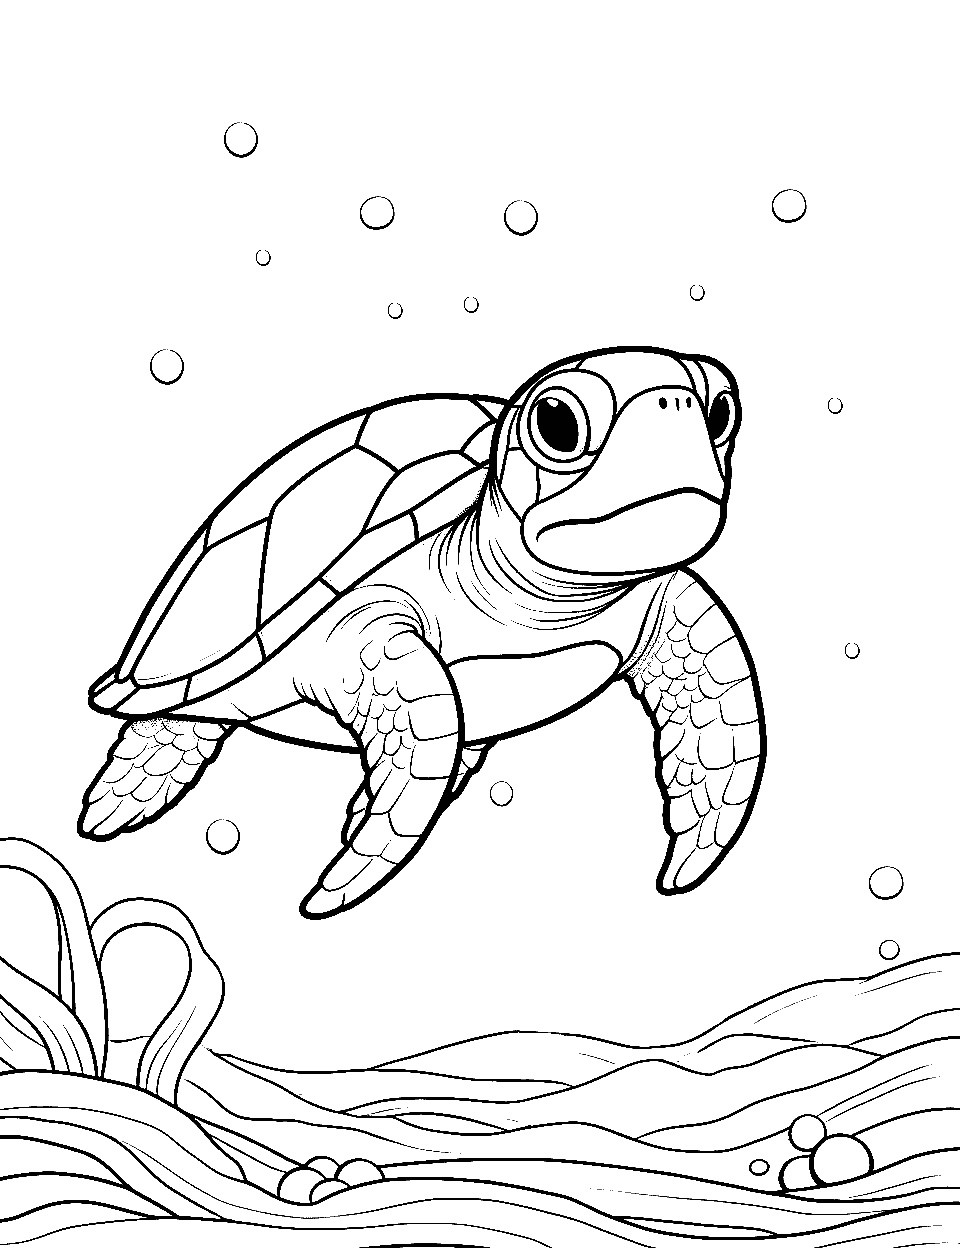 Tucker the Friendly Turtle Coloring Page - Tucker, a friendly-looking turtle swimming through the ocean.